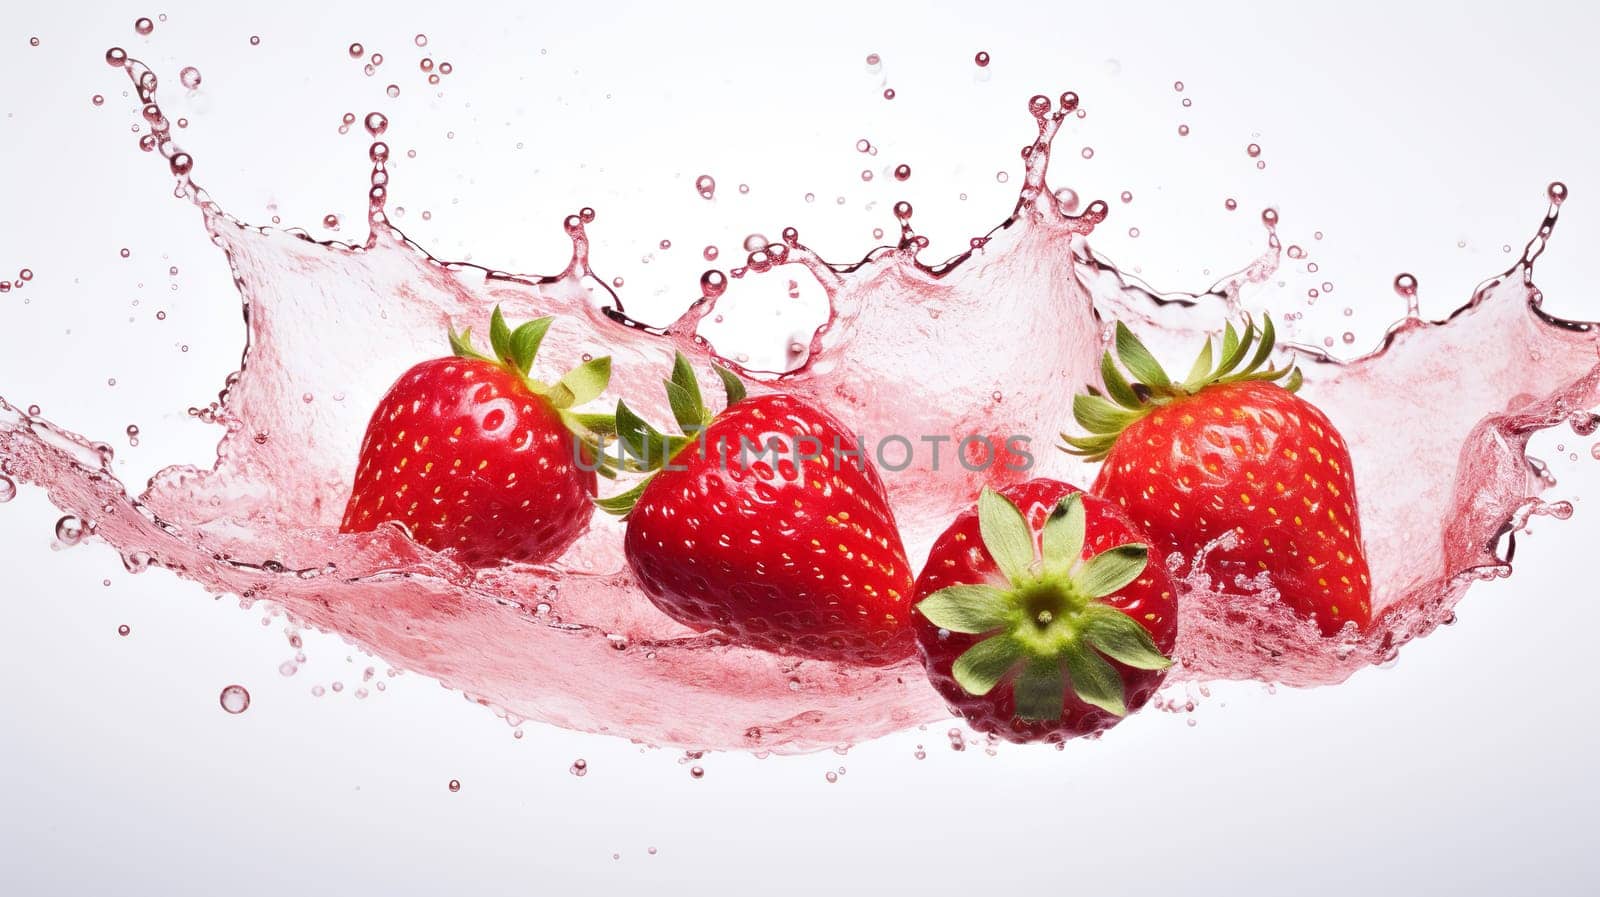 pink strawberries, with splashes of water, white background  Generate AI by Mrsongrphc